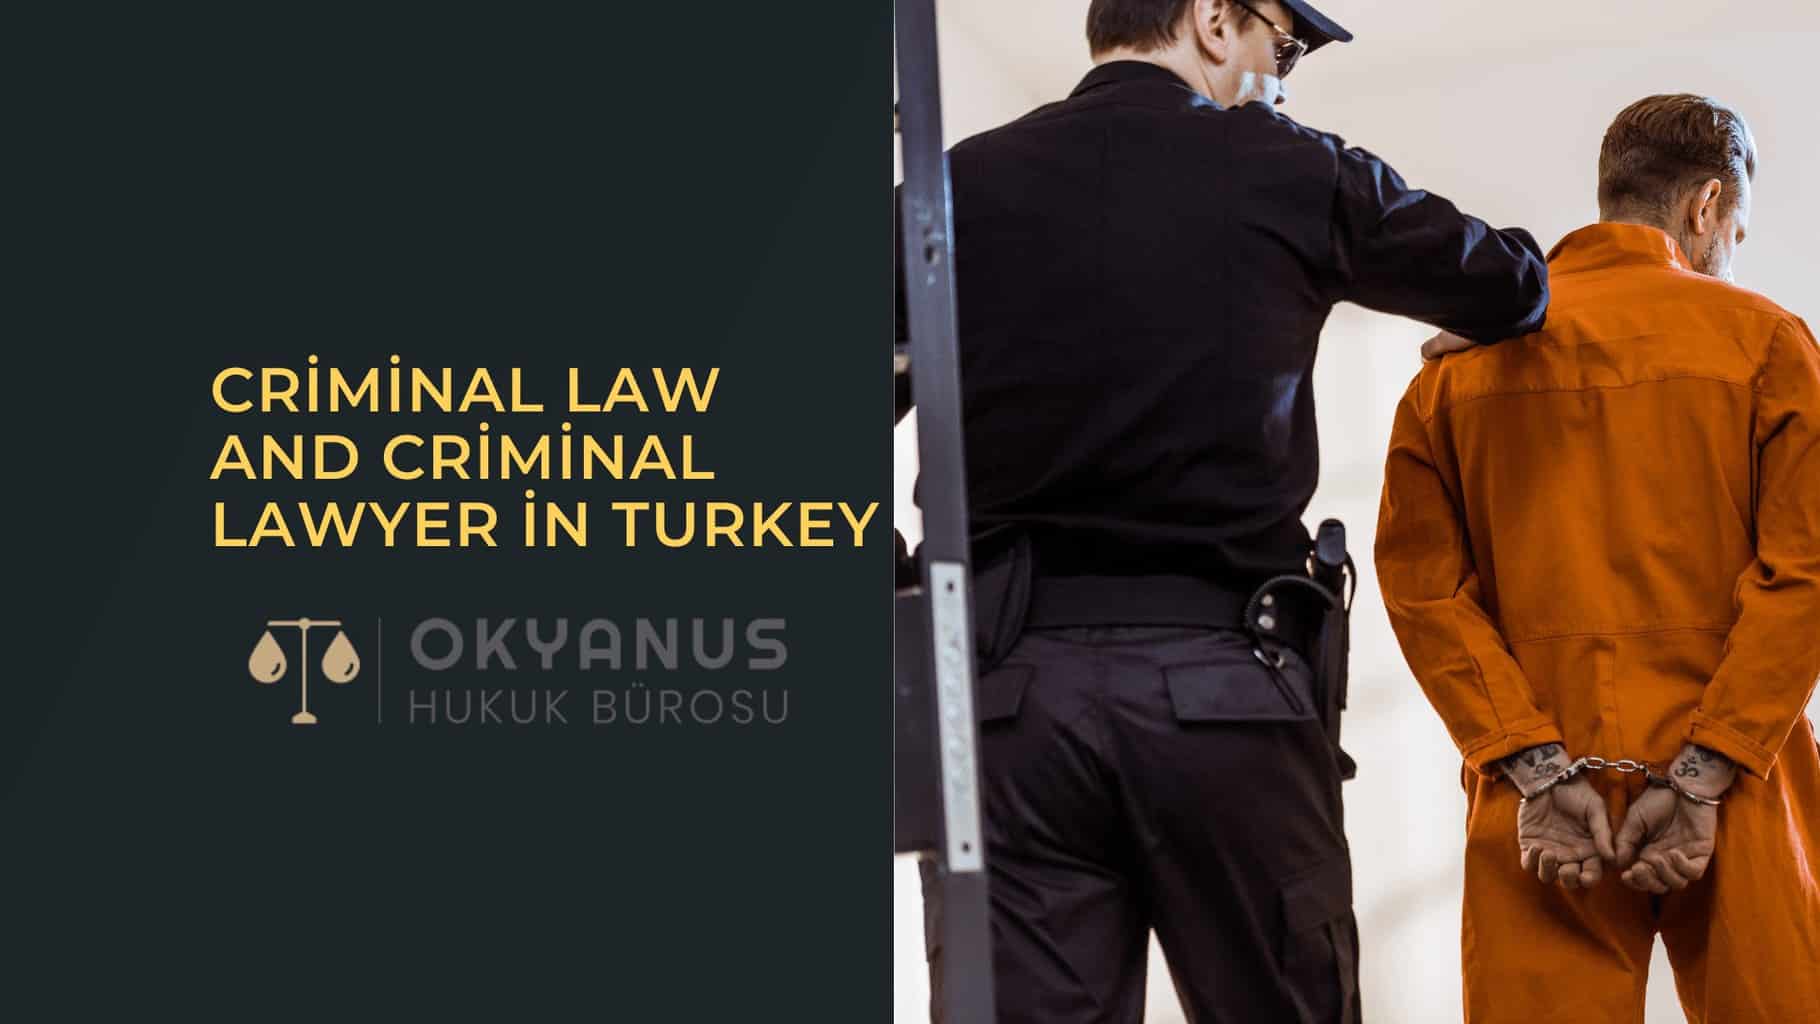 Criminal Law and Criminal Lawyer in Turkey